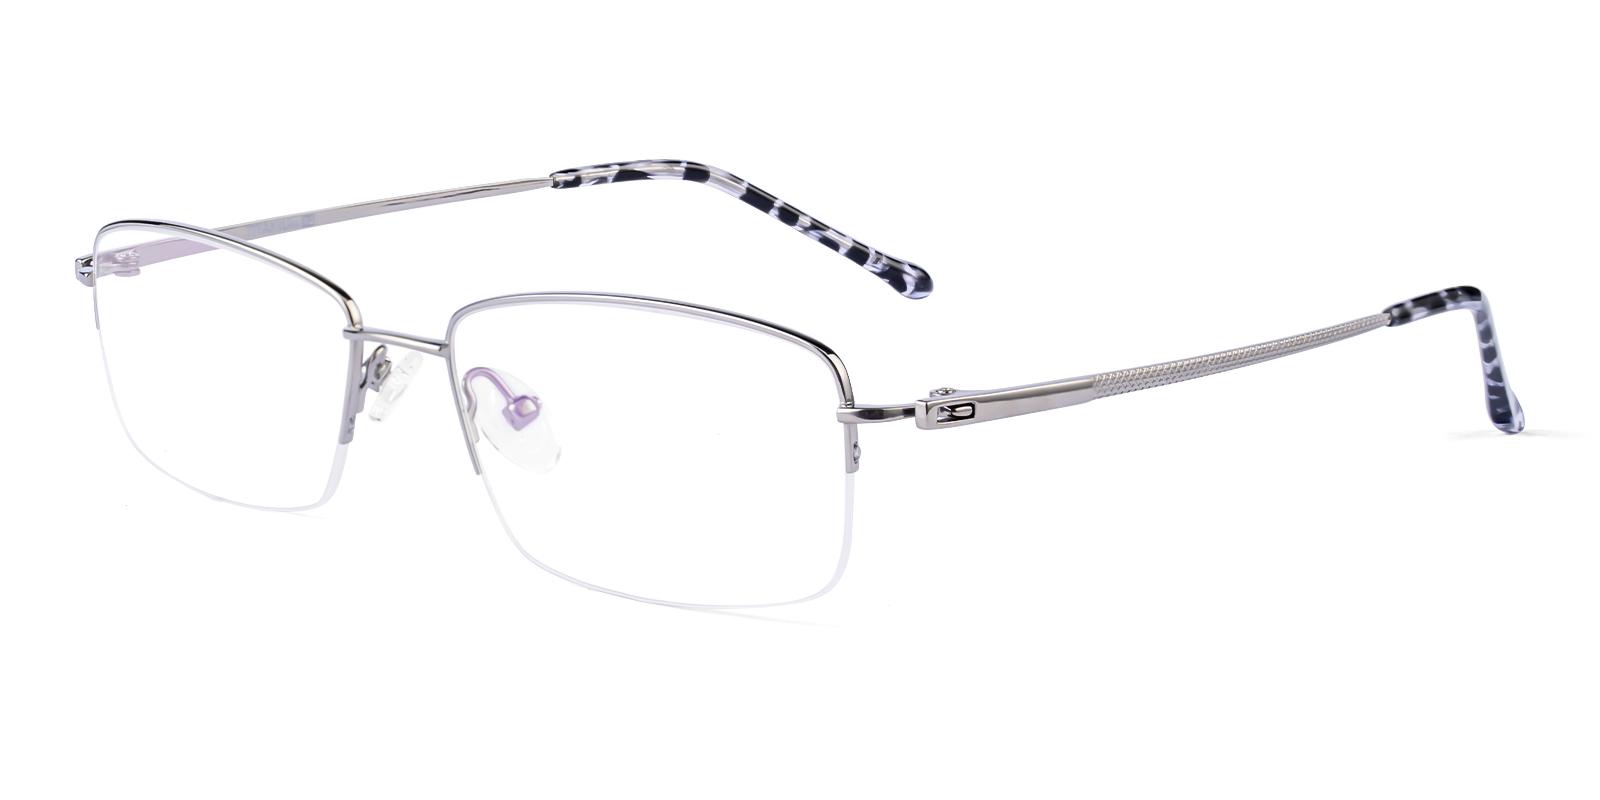 Absel Silver Titanium Eyeglasses , NosePads Frames from ABBE Glasses